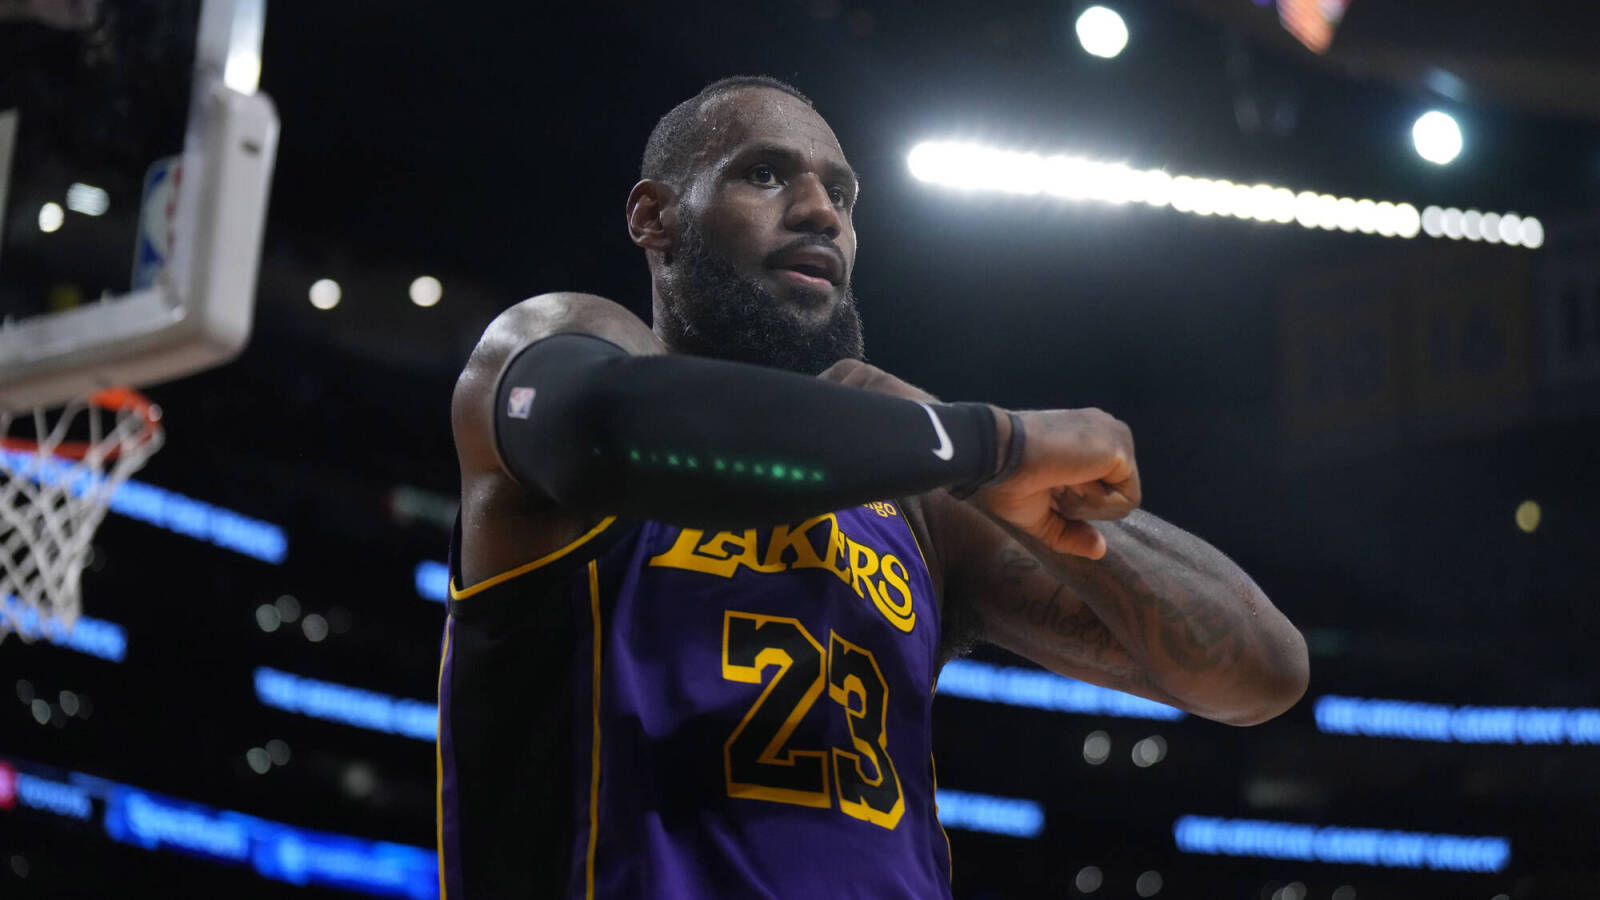 LeBron James perfectly summed up incredible family success by sharing his mom’s emotional message